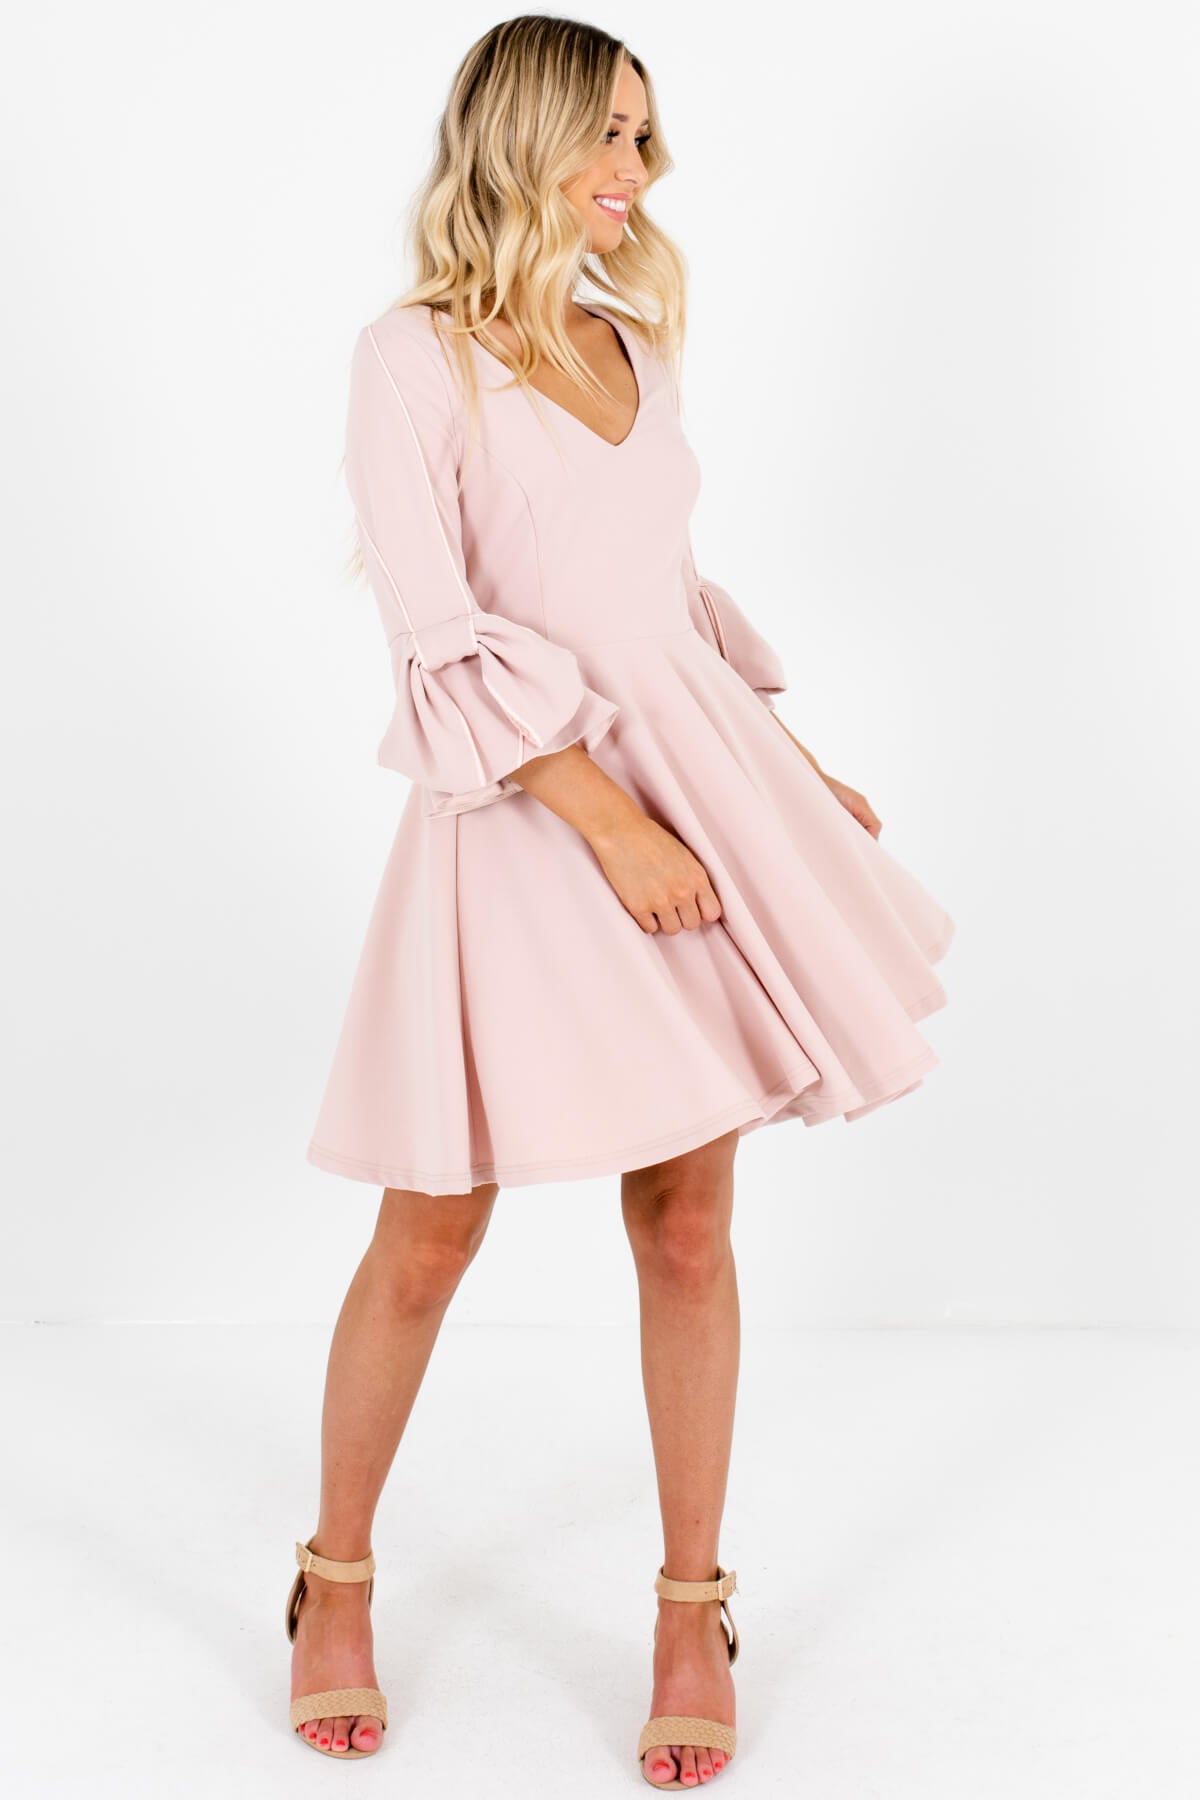 Blush Pink Cute Pleated Bow Sleeve Mini Dresses for Women